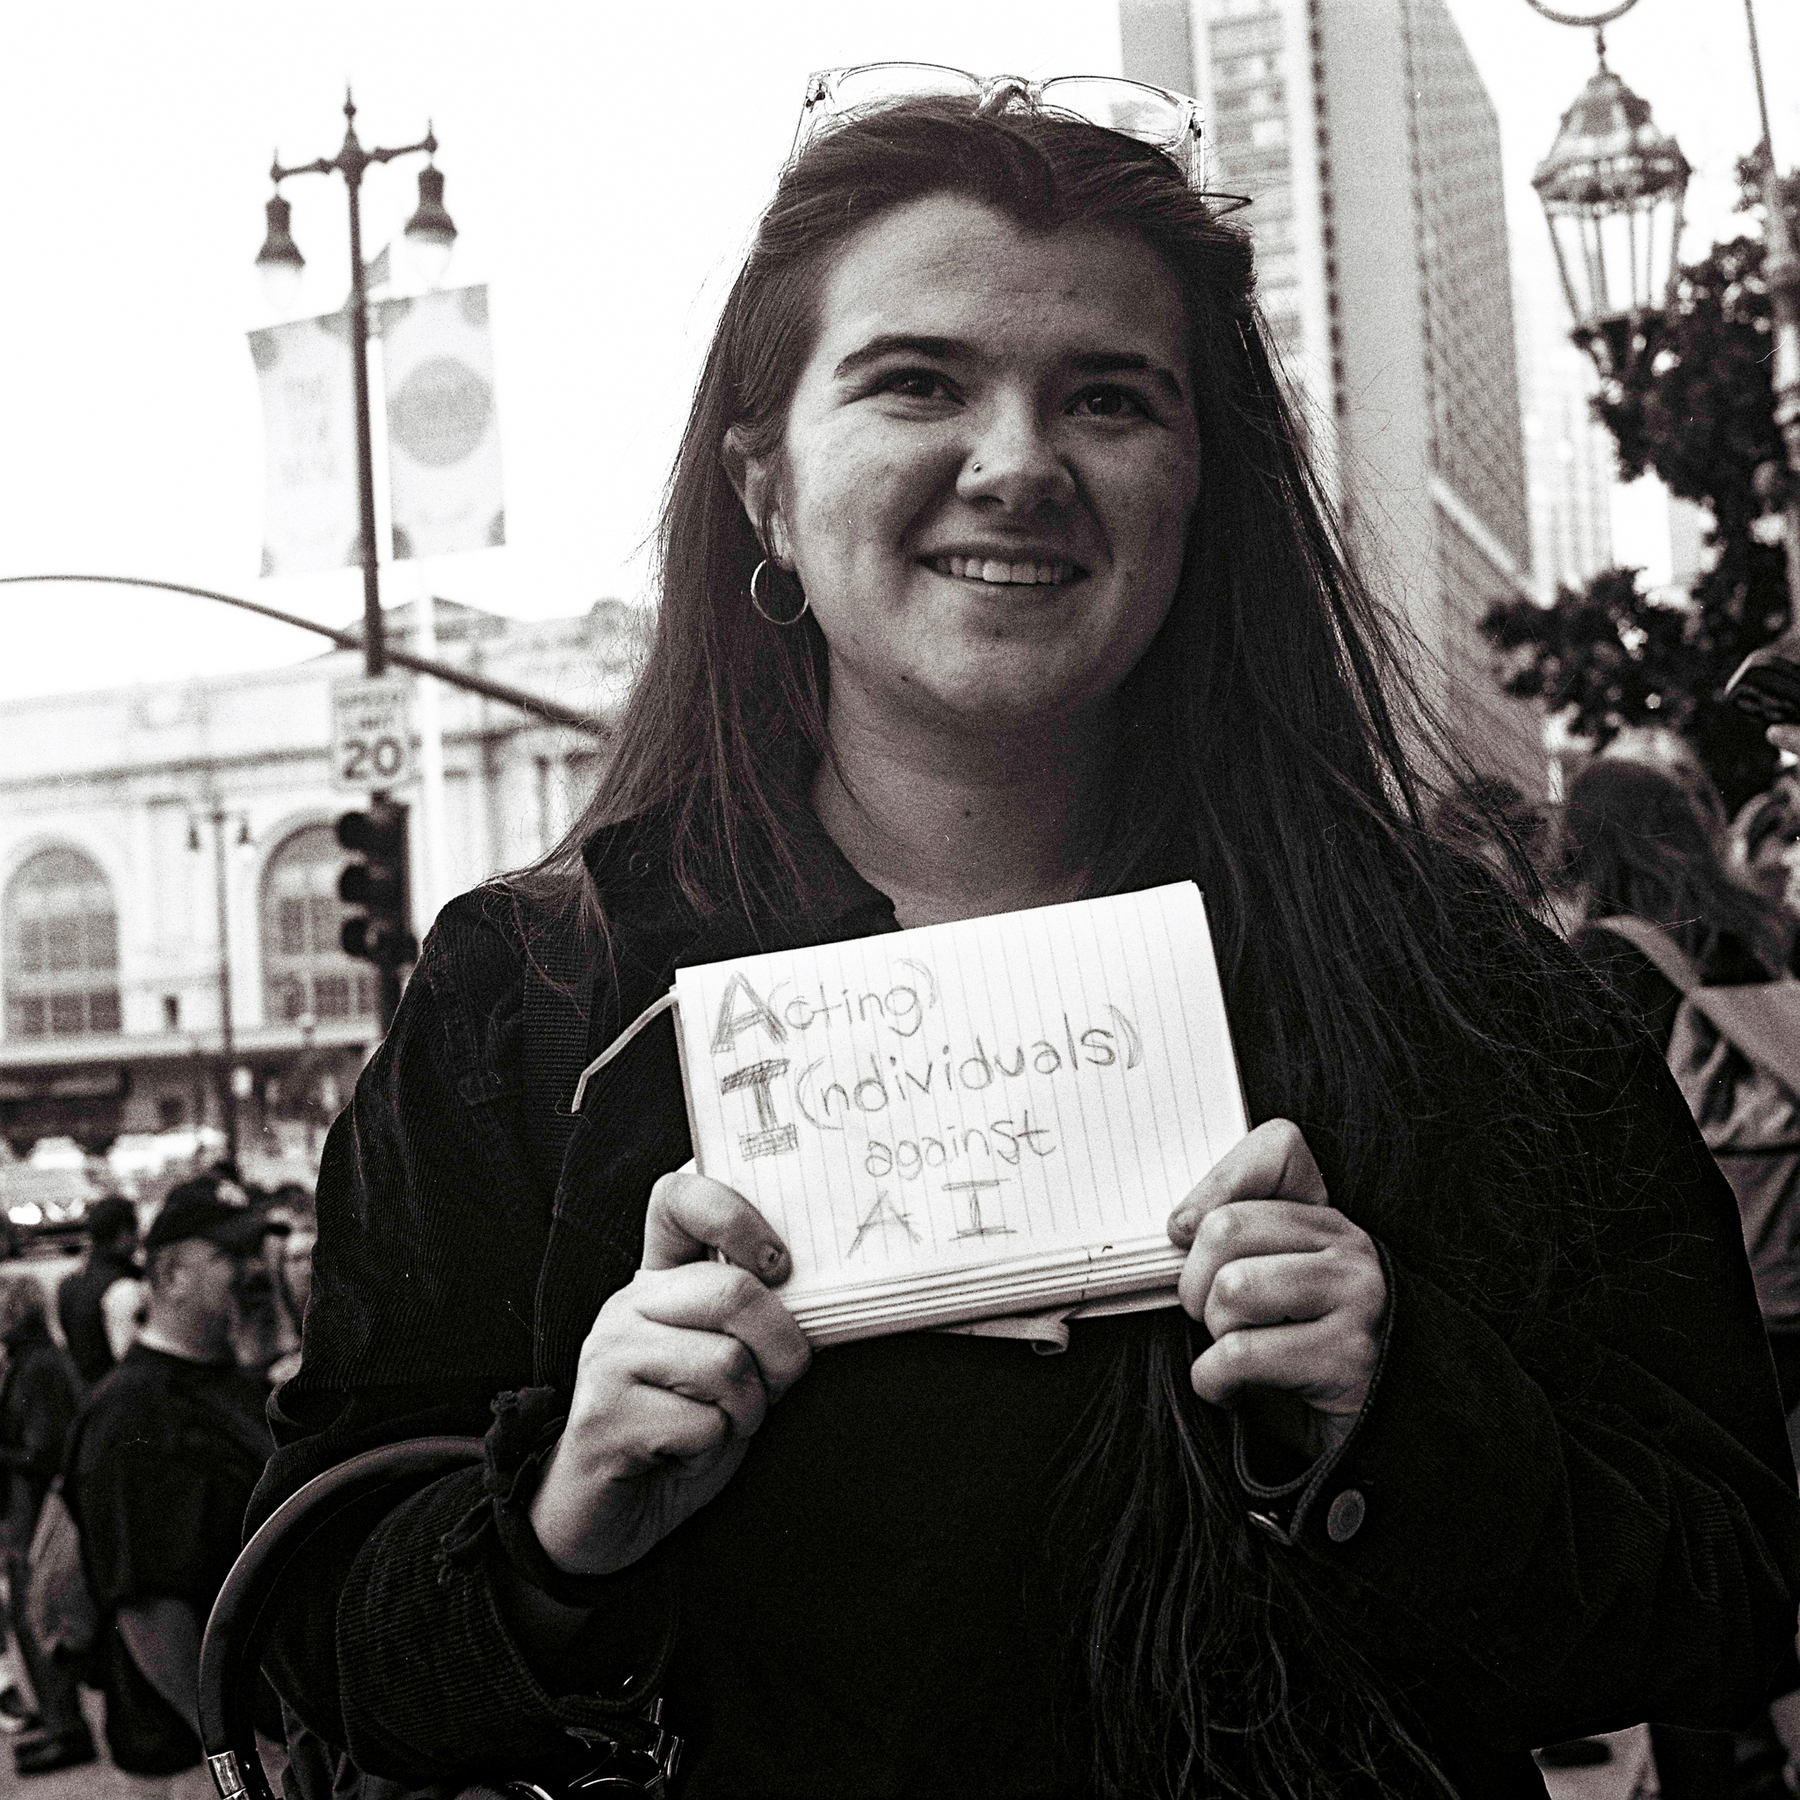 a scan of a black and white photo showing a woman holding a handmade sign written on a piece of ruled paper that says A(cting) I(ndividuals) Against AI